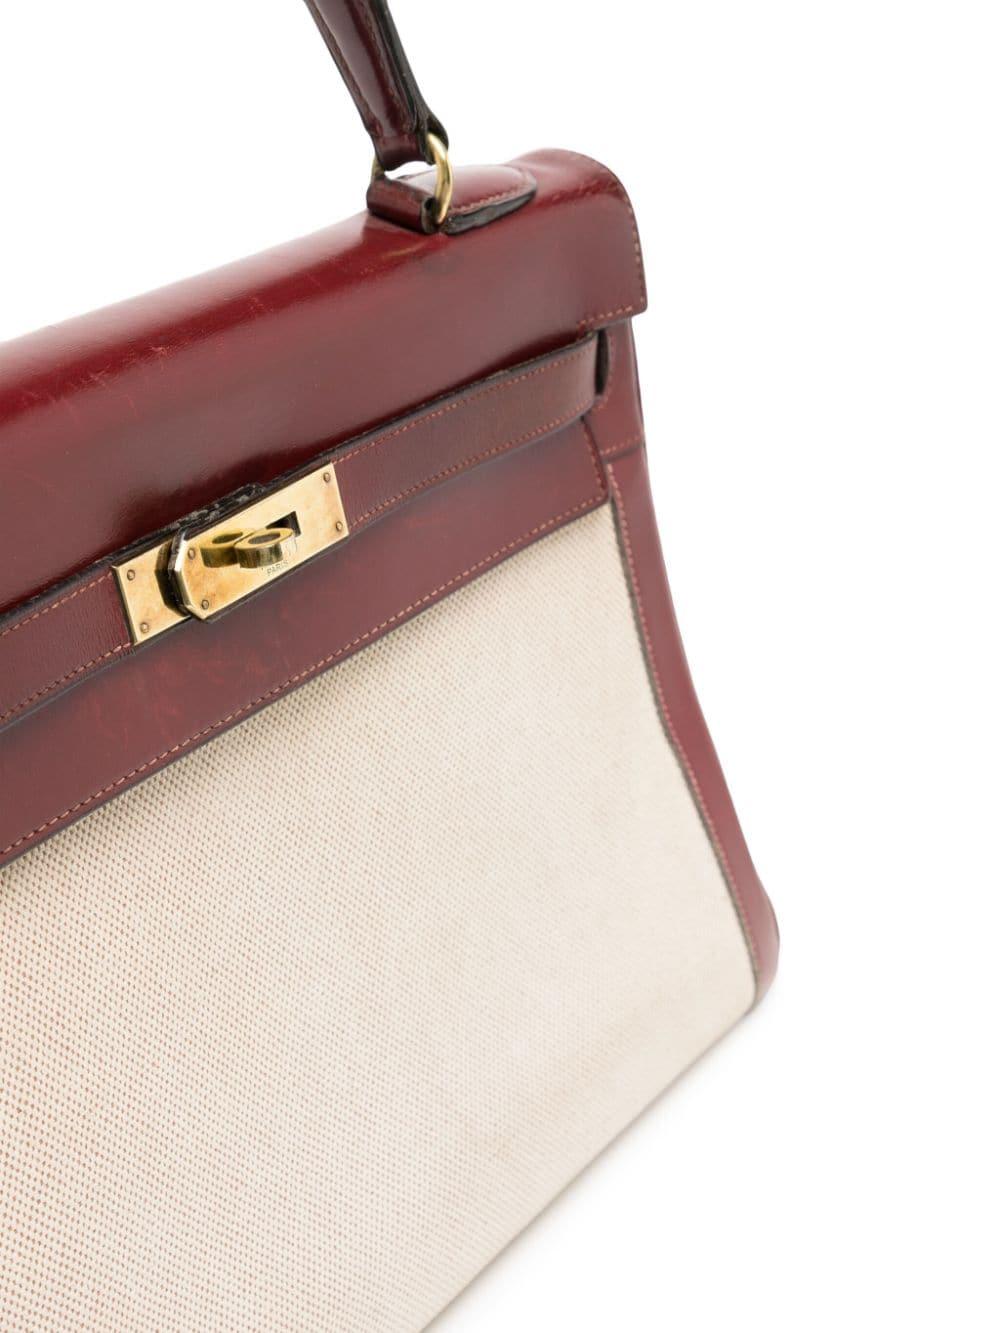 Named after Grace Kelly in 1977, the Kelly bag from Hermès became one of the most sought-after styles in the world. Crafted from smooth leather and canvas with gold-tone hardware, the handbag became famous as Princess Grace Kelly constantly matched